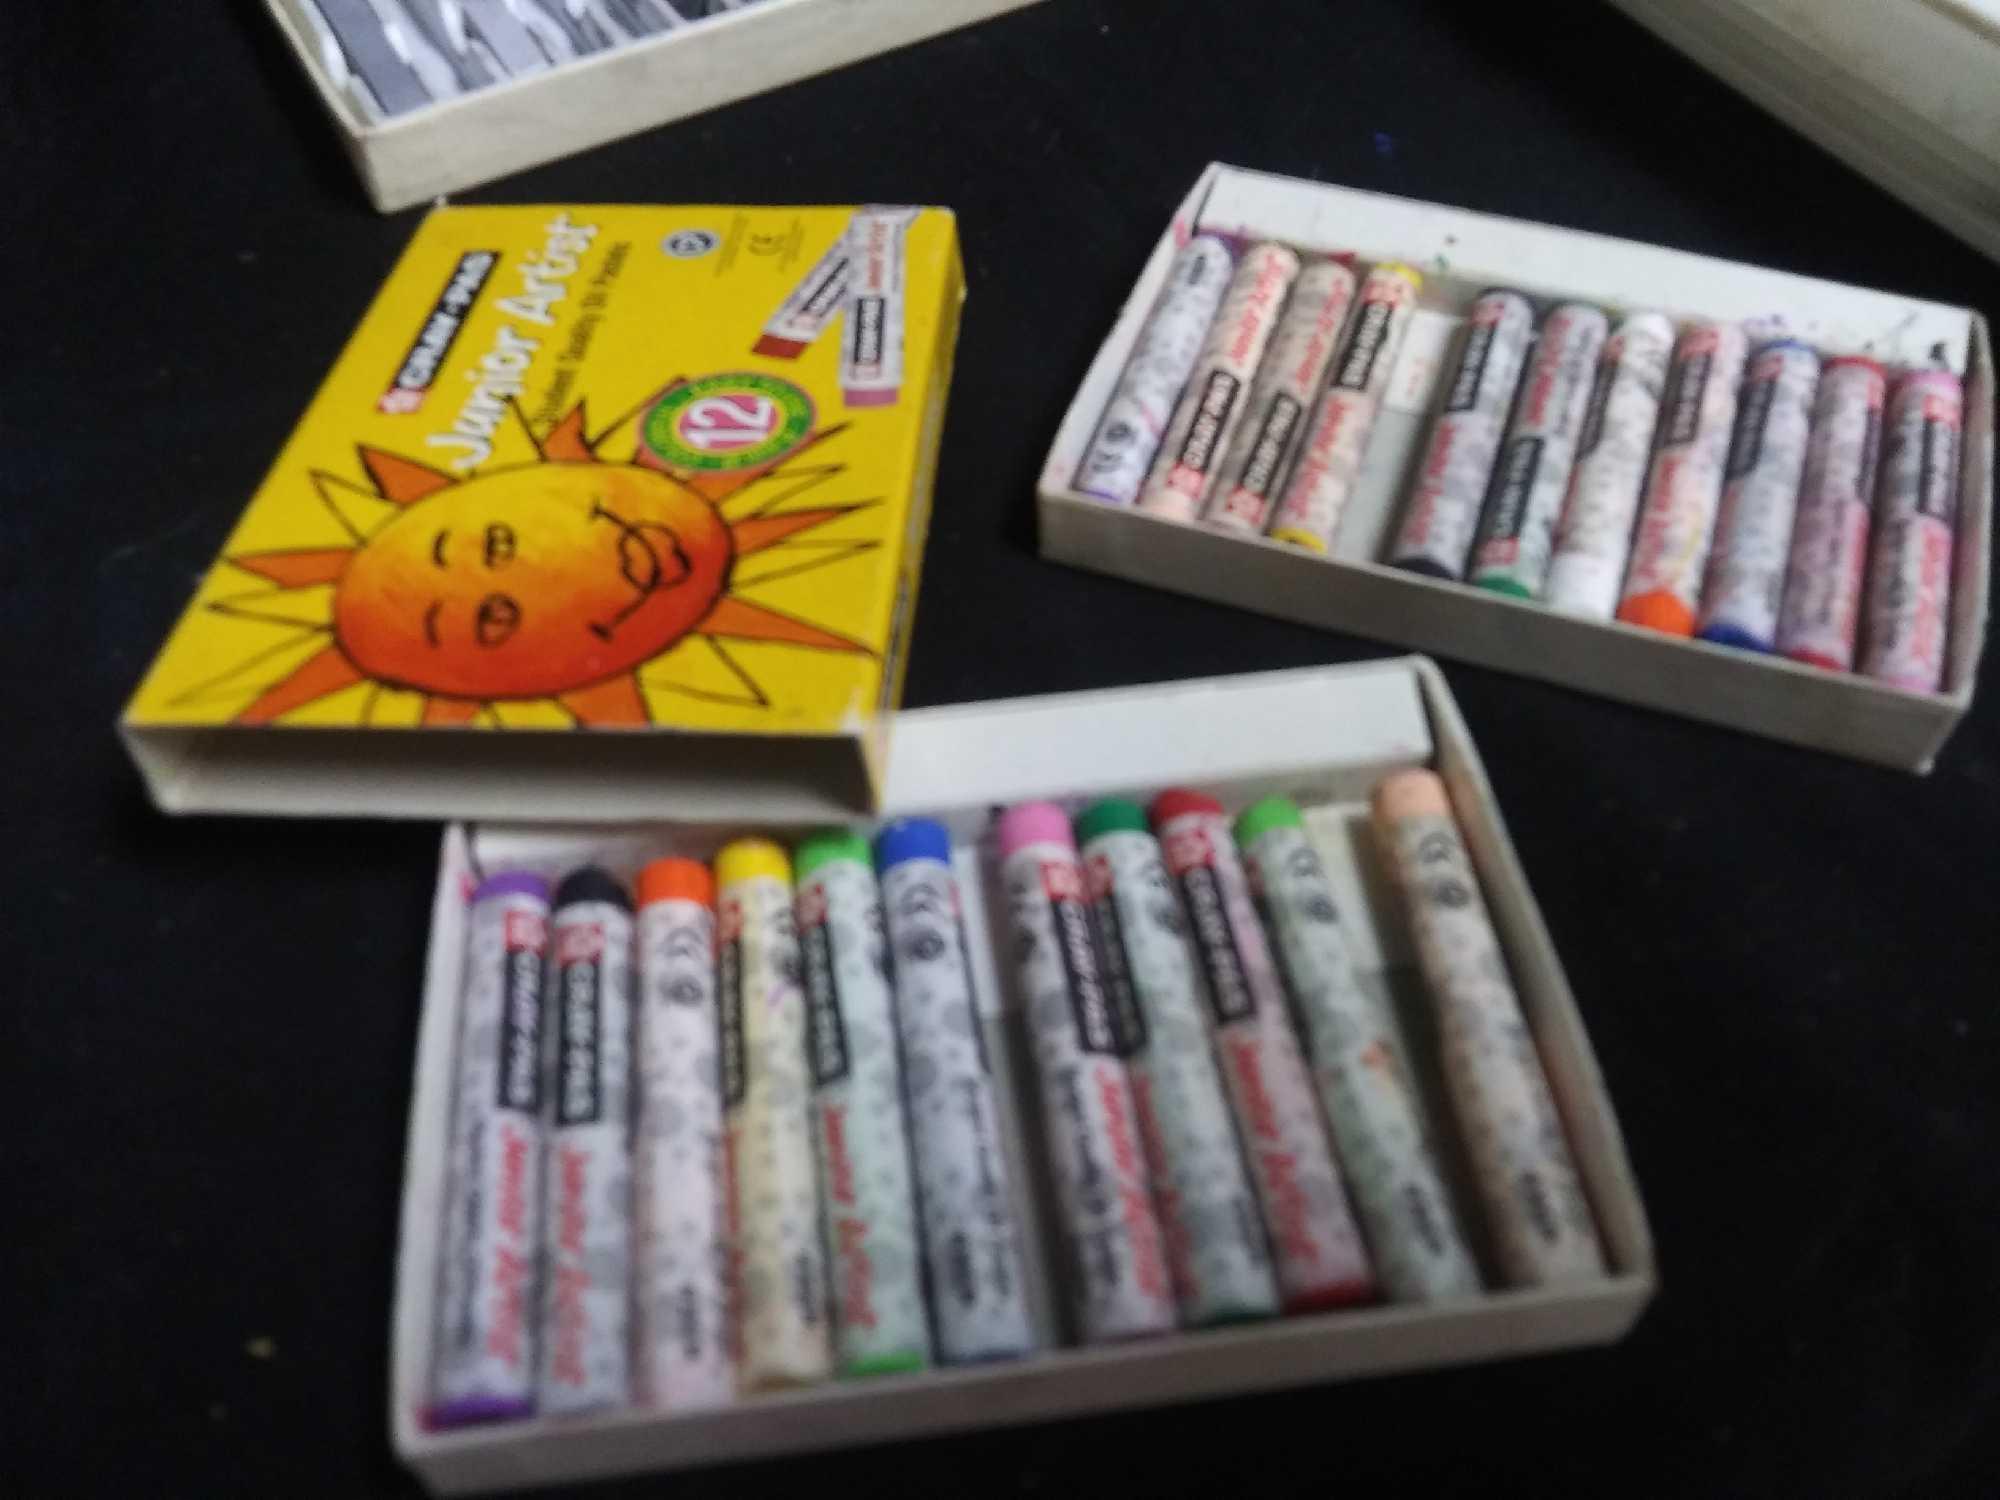 Small Group of Artist and Amateur Quality pastels and pastel pencils